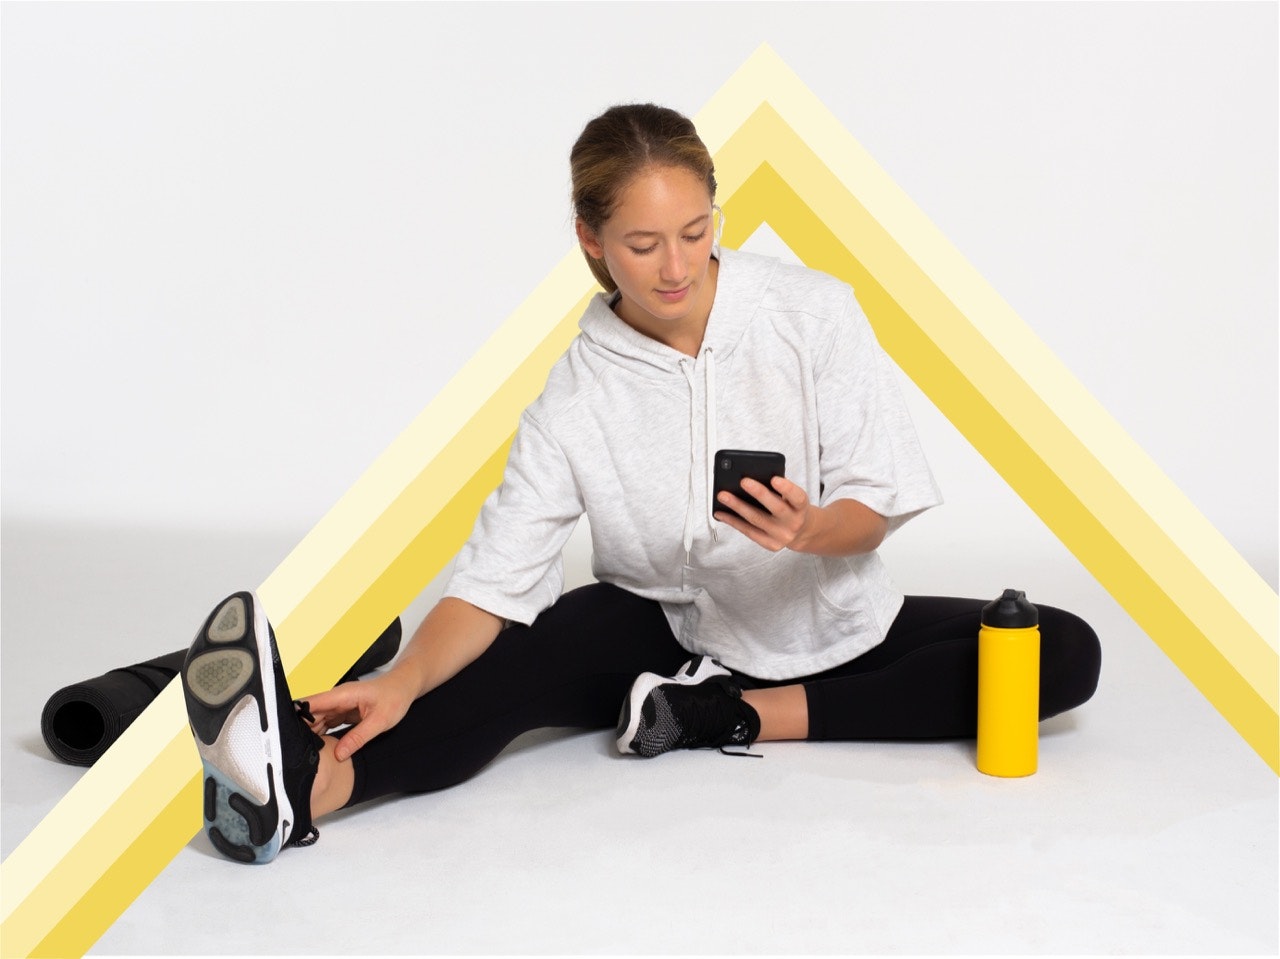 Woman sitting on the ground under a yellow triangle, stretching and looking at her phone